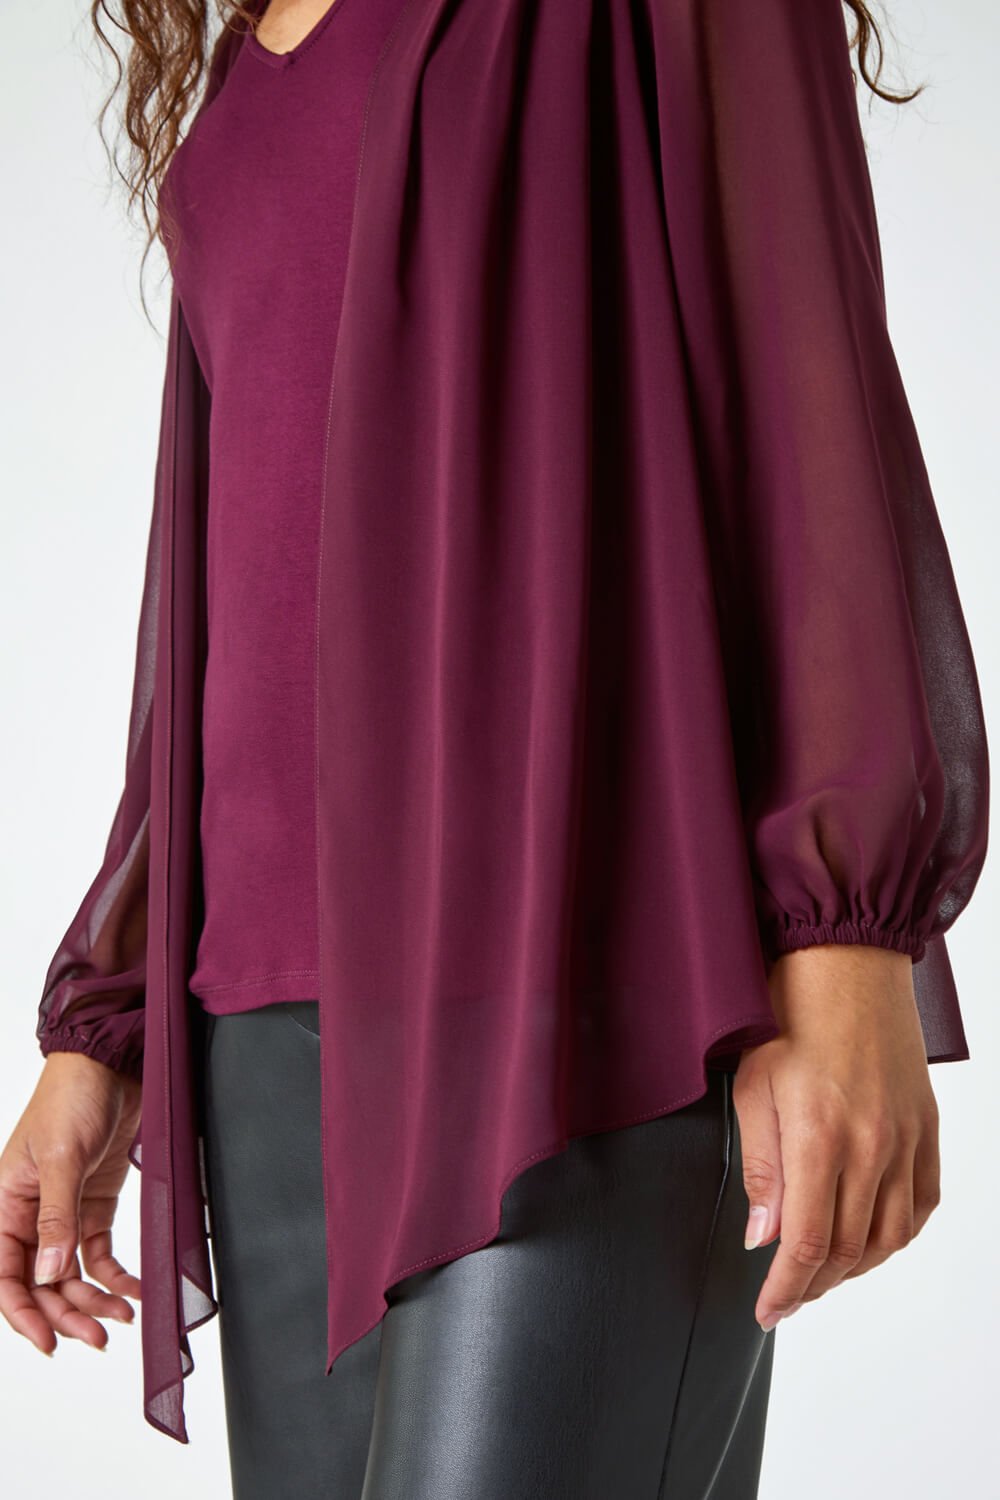 Wine Contrast Chiffon Overlay Stretch Top, Image 5 of 5